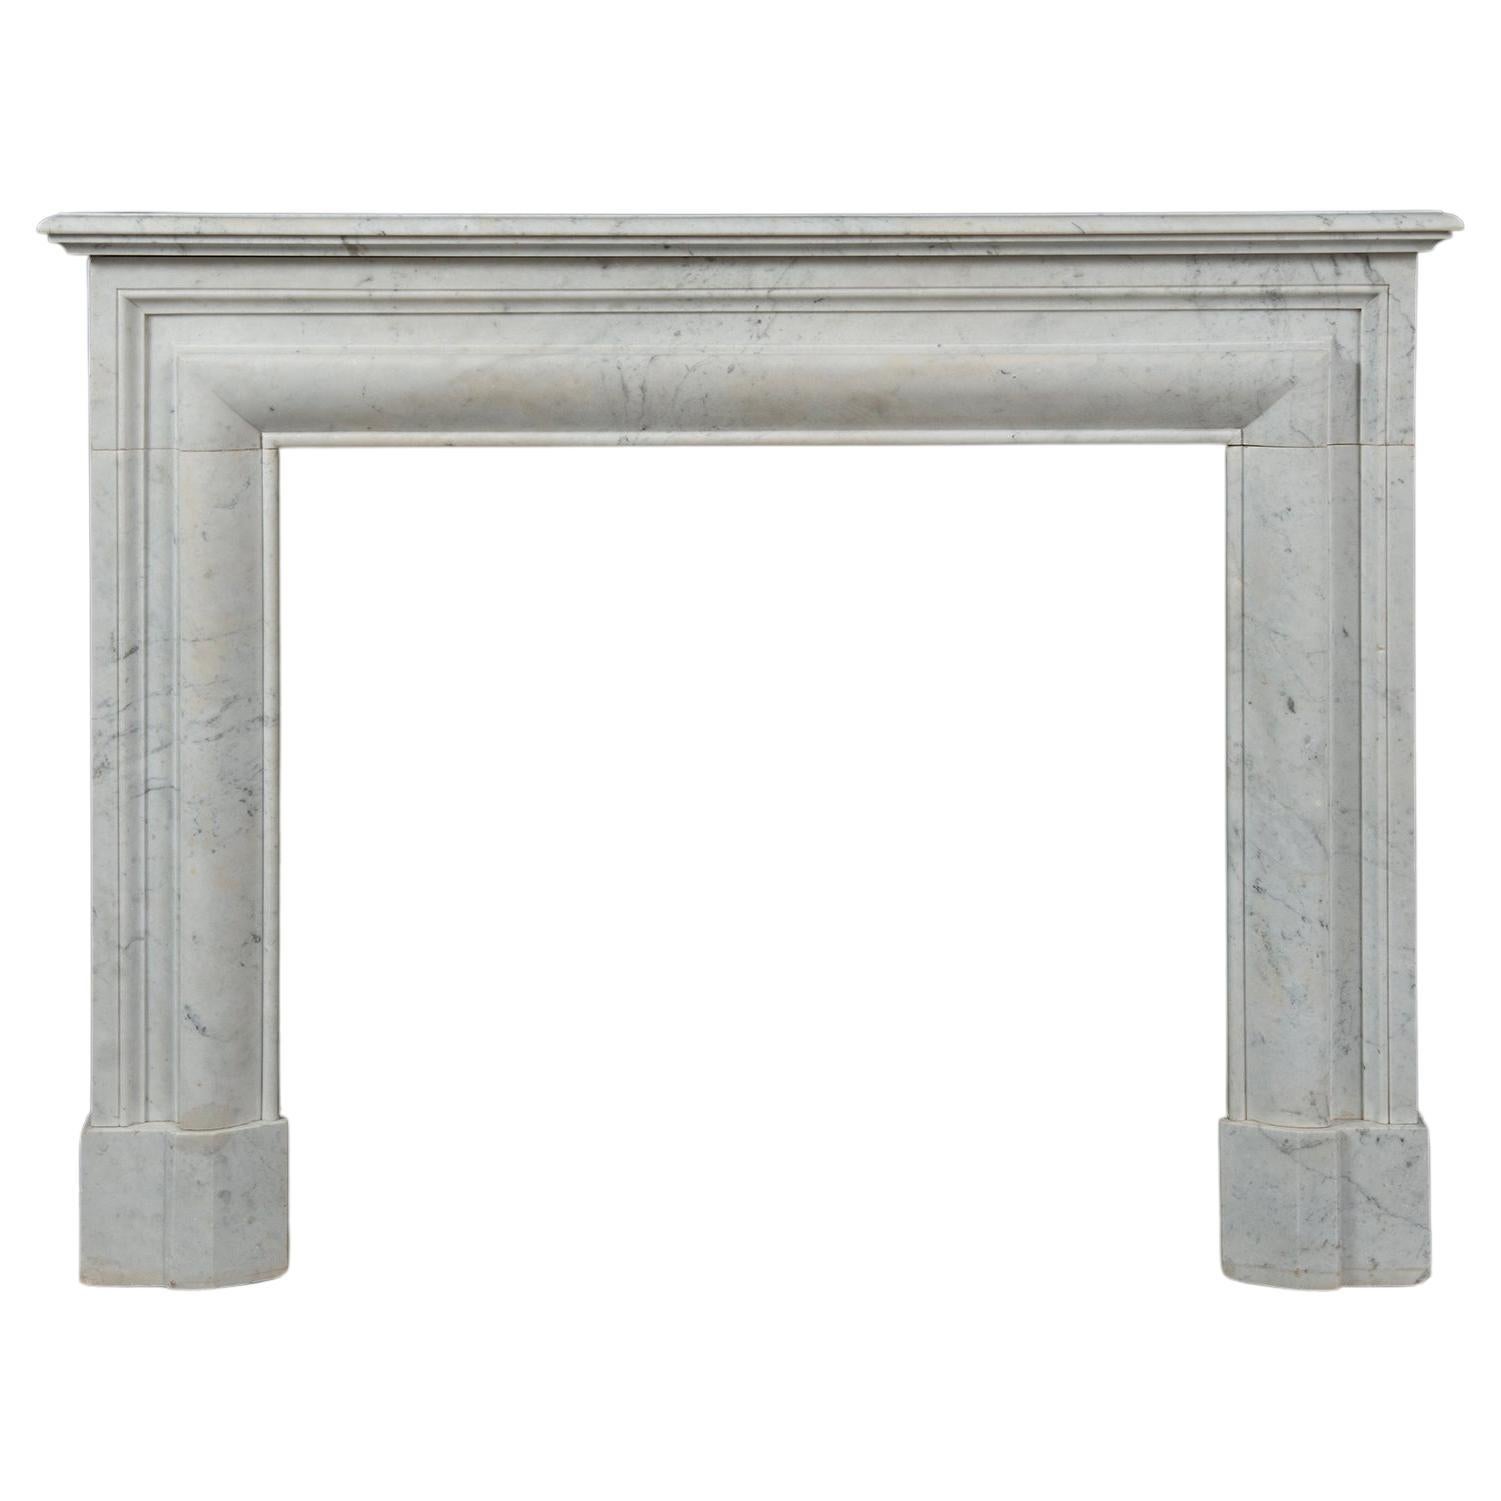 Antique White Marble Fireplace Mantel